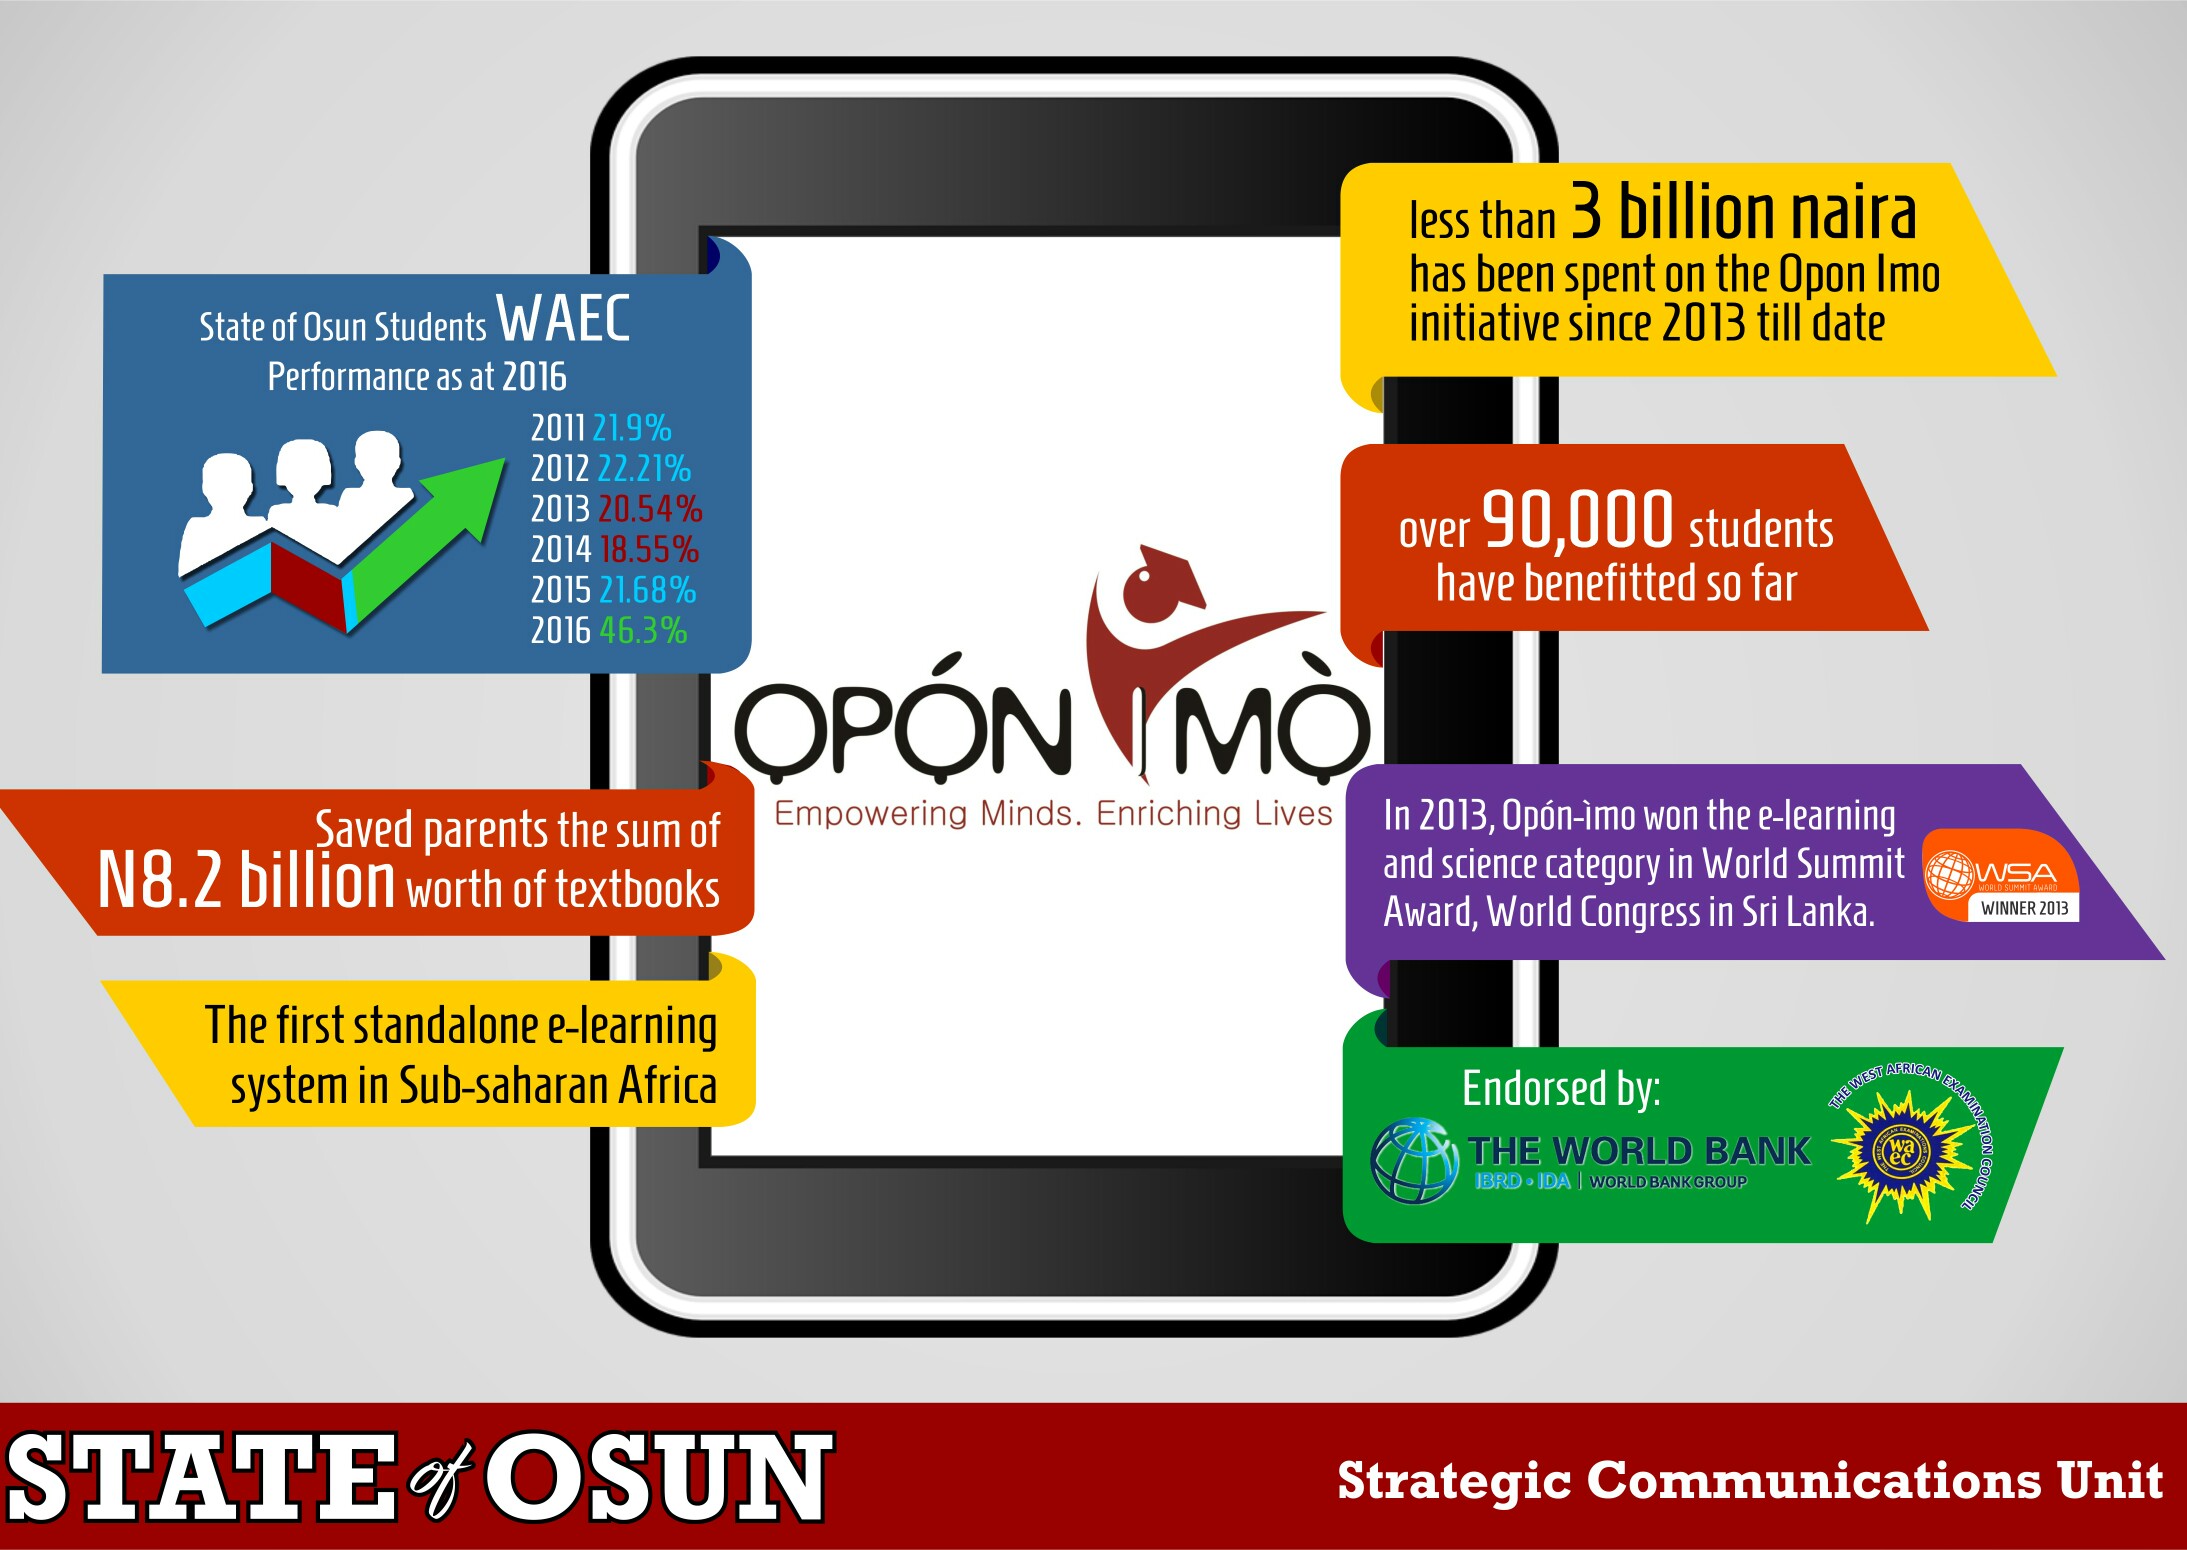 10 Things You Don’t Know About ‘Opon Imo’